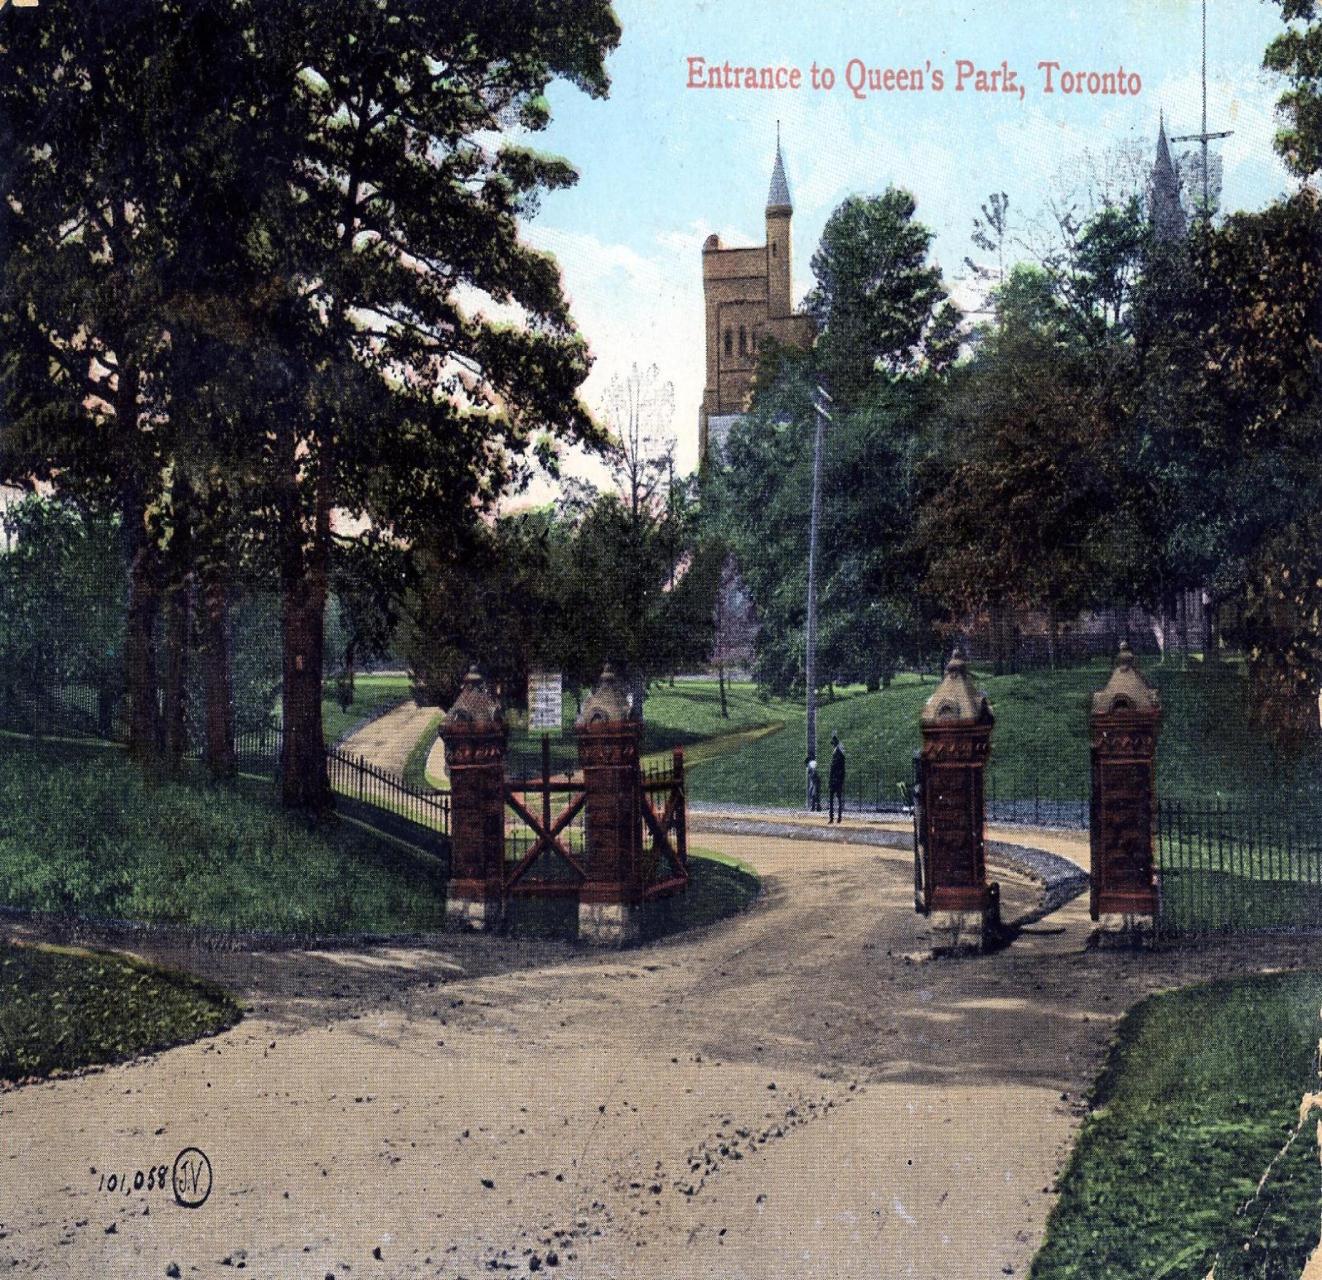 Entrance to Queen’s Park, looking north.